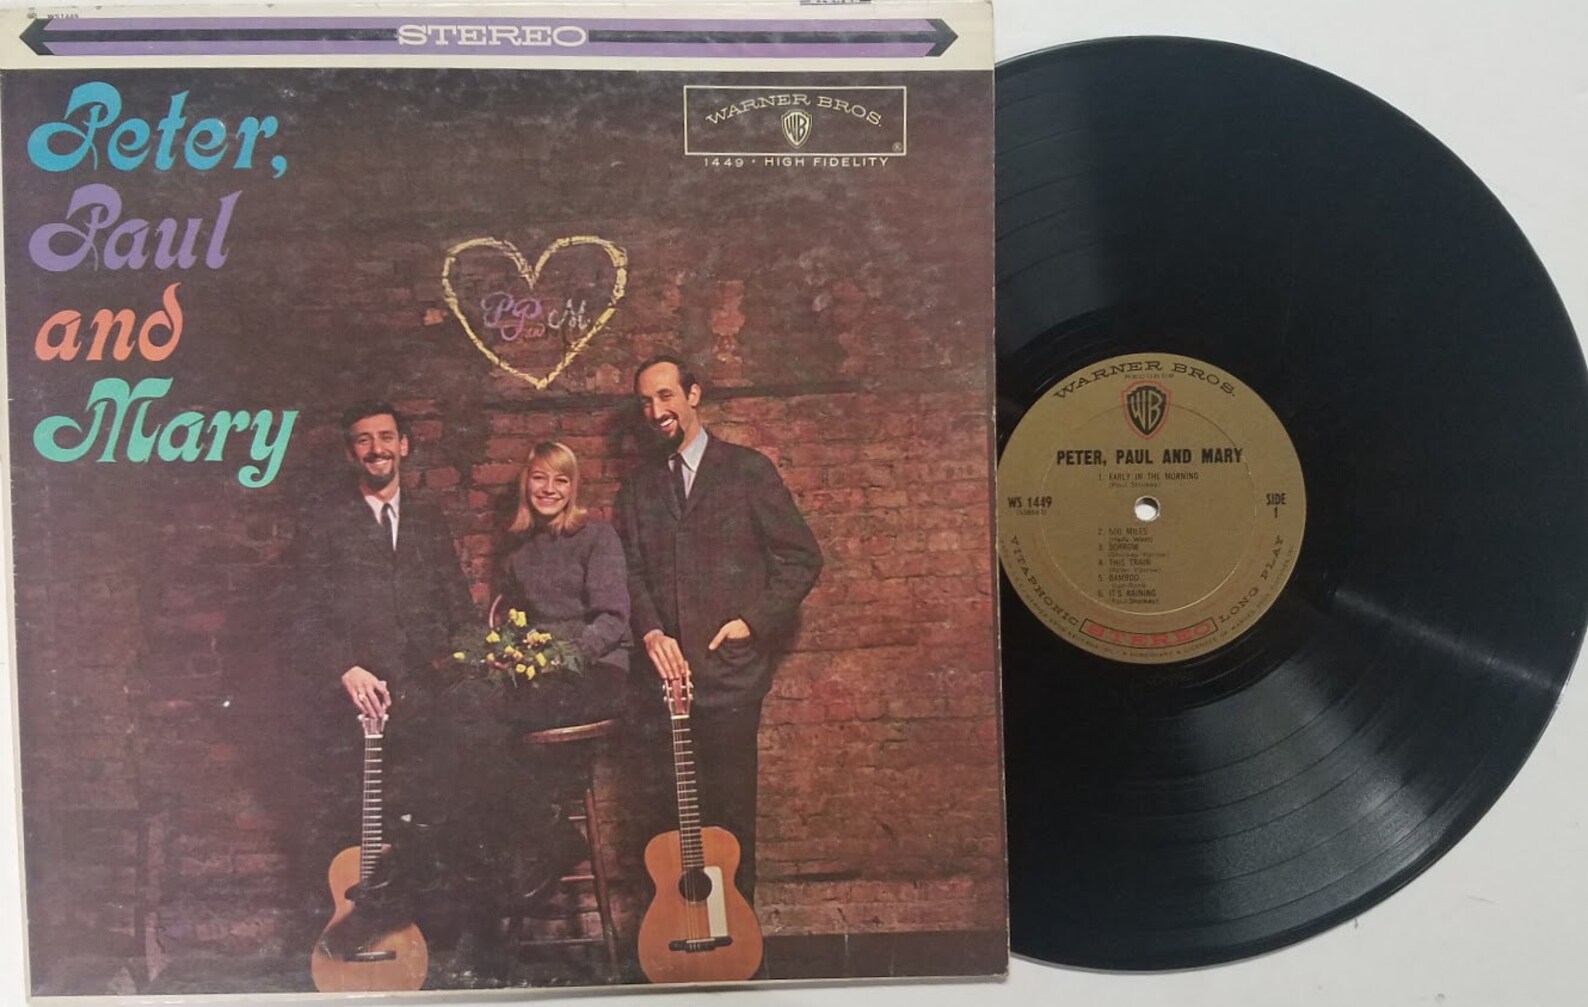 Vintage Vinyl 1962 Record Album by Peter Paul And Mary titled Etsy